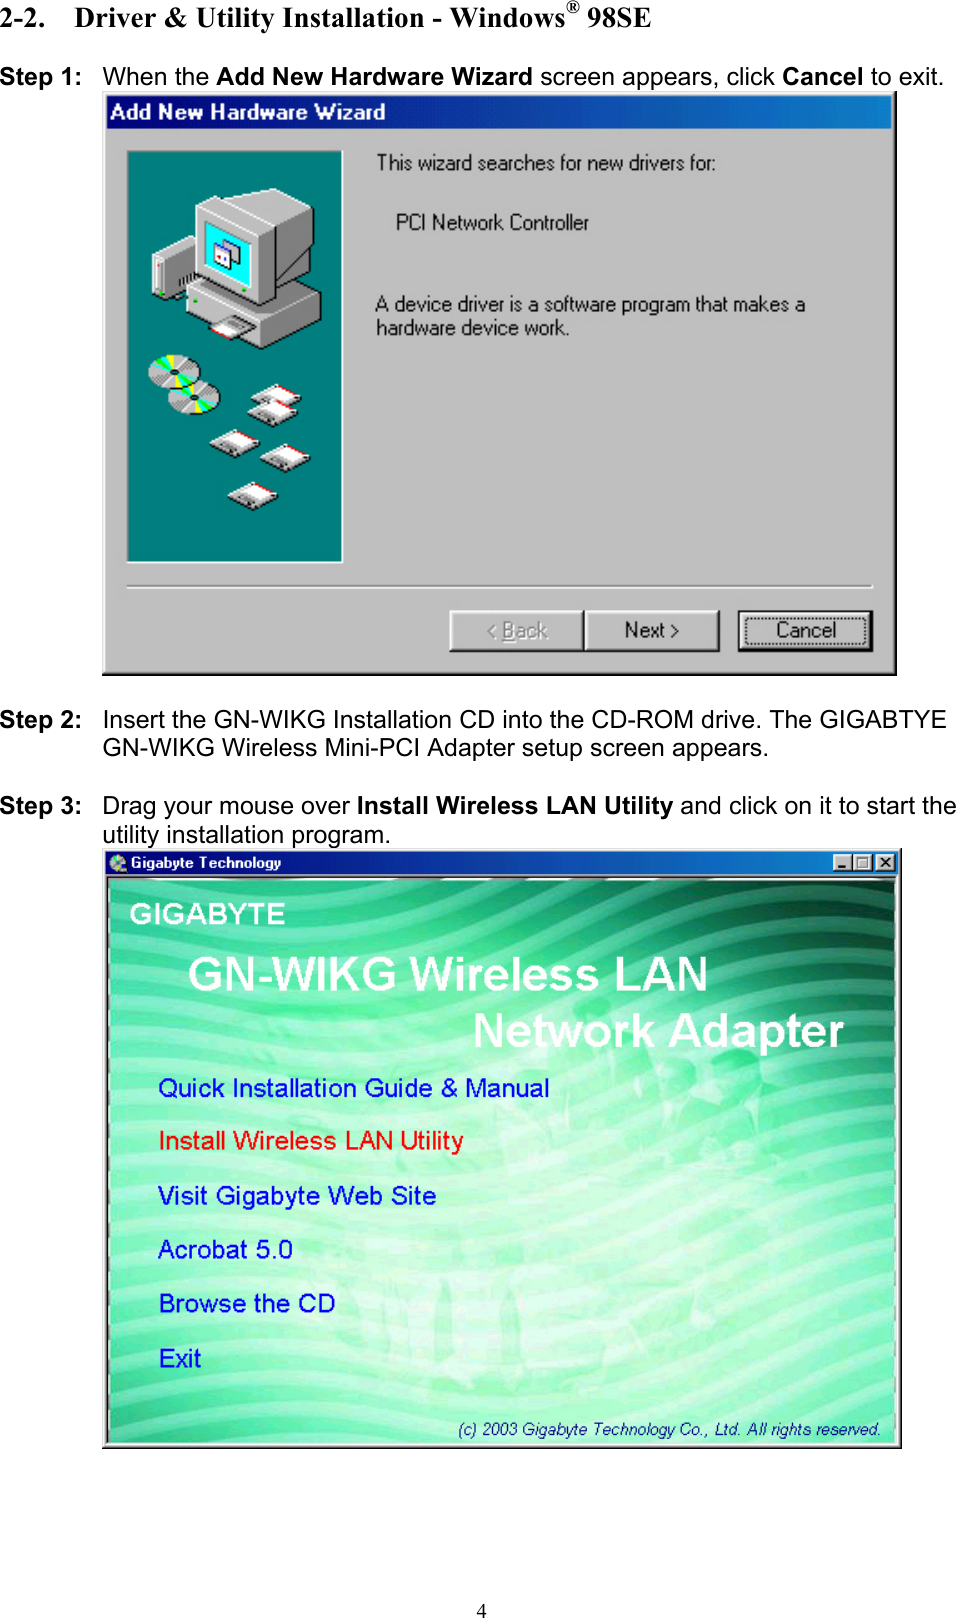 4  2-2.  Driver &amp; Utility Installation - Windows® 98SE  Step 1: When the Add New Hardware Wizard screen appears, click Cancel to exit.   Step 2:  Insert the GN-WIKG Installation CD into the CD-ROM drive. The GIGABTYE GN-WIKG Wireless Mini-PCI Adapter setup screen appears.  Step 3:  Drag your mouse over Install Wireless LAN Utility and click on it to start the utility installation program.   